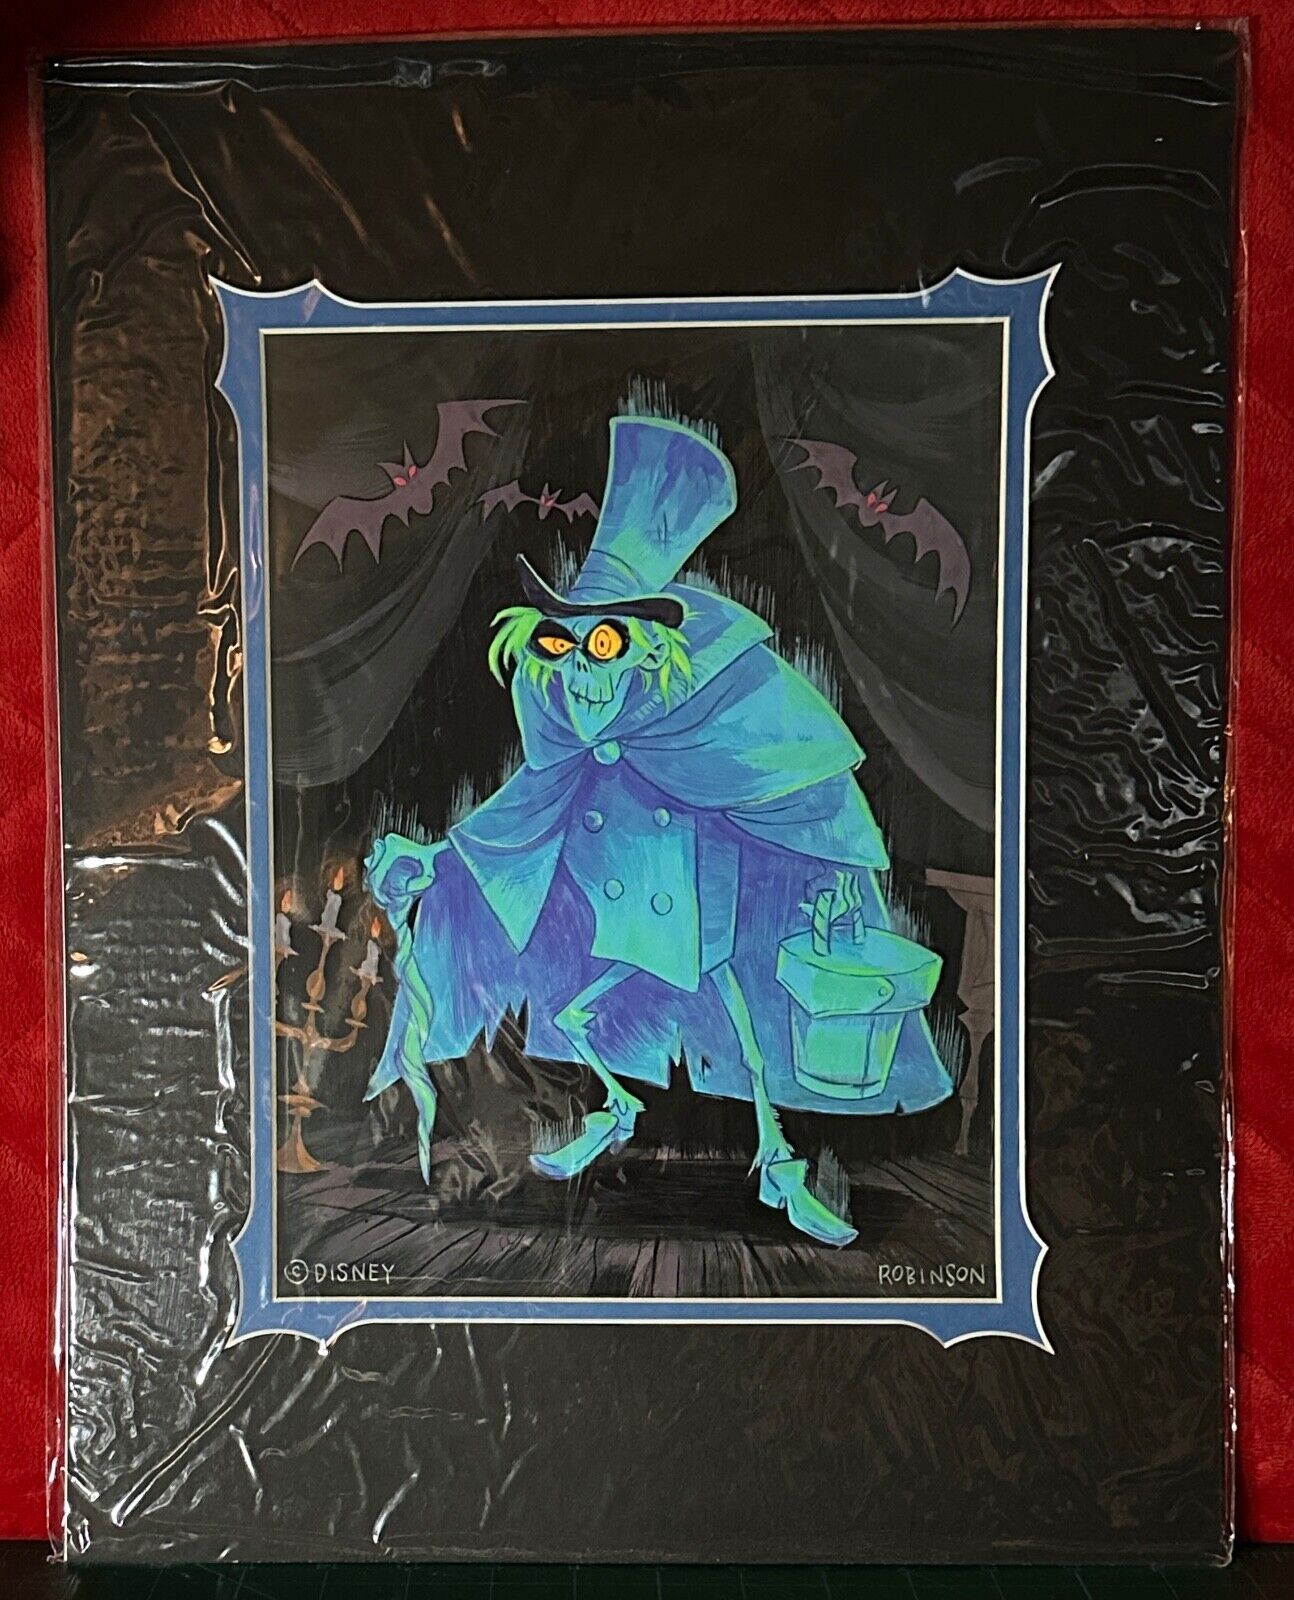 Disney Parks Haunted Mansion Hatbox Ghost Montage Print By Bill Robinson NEW